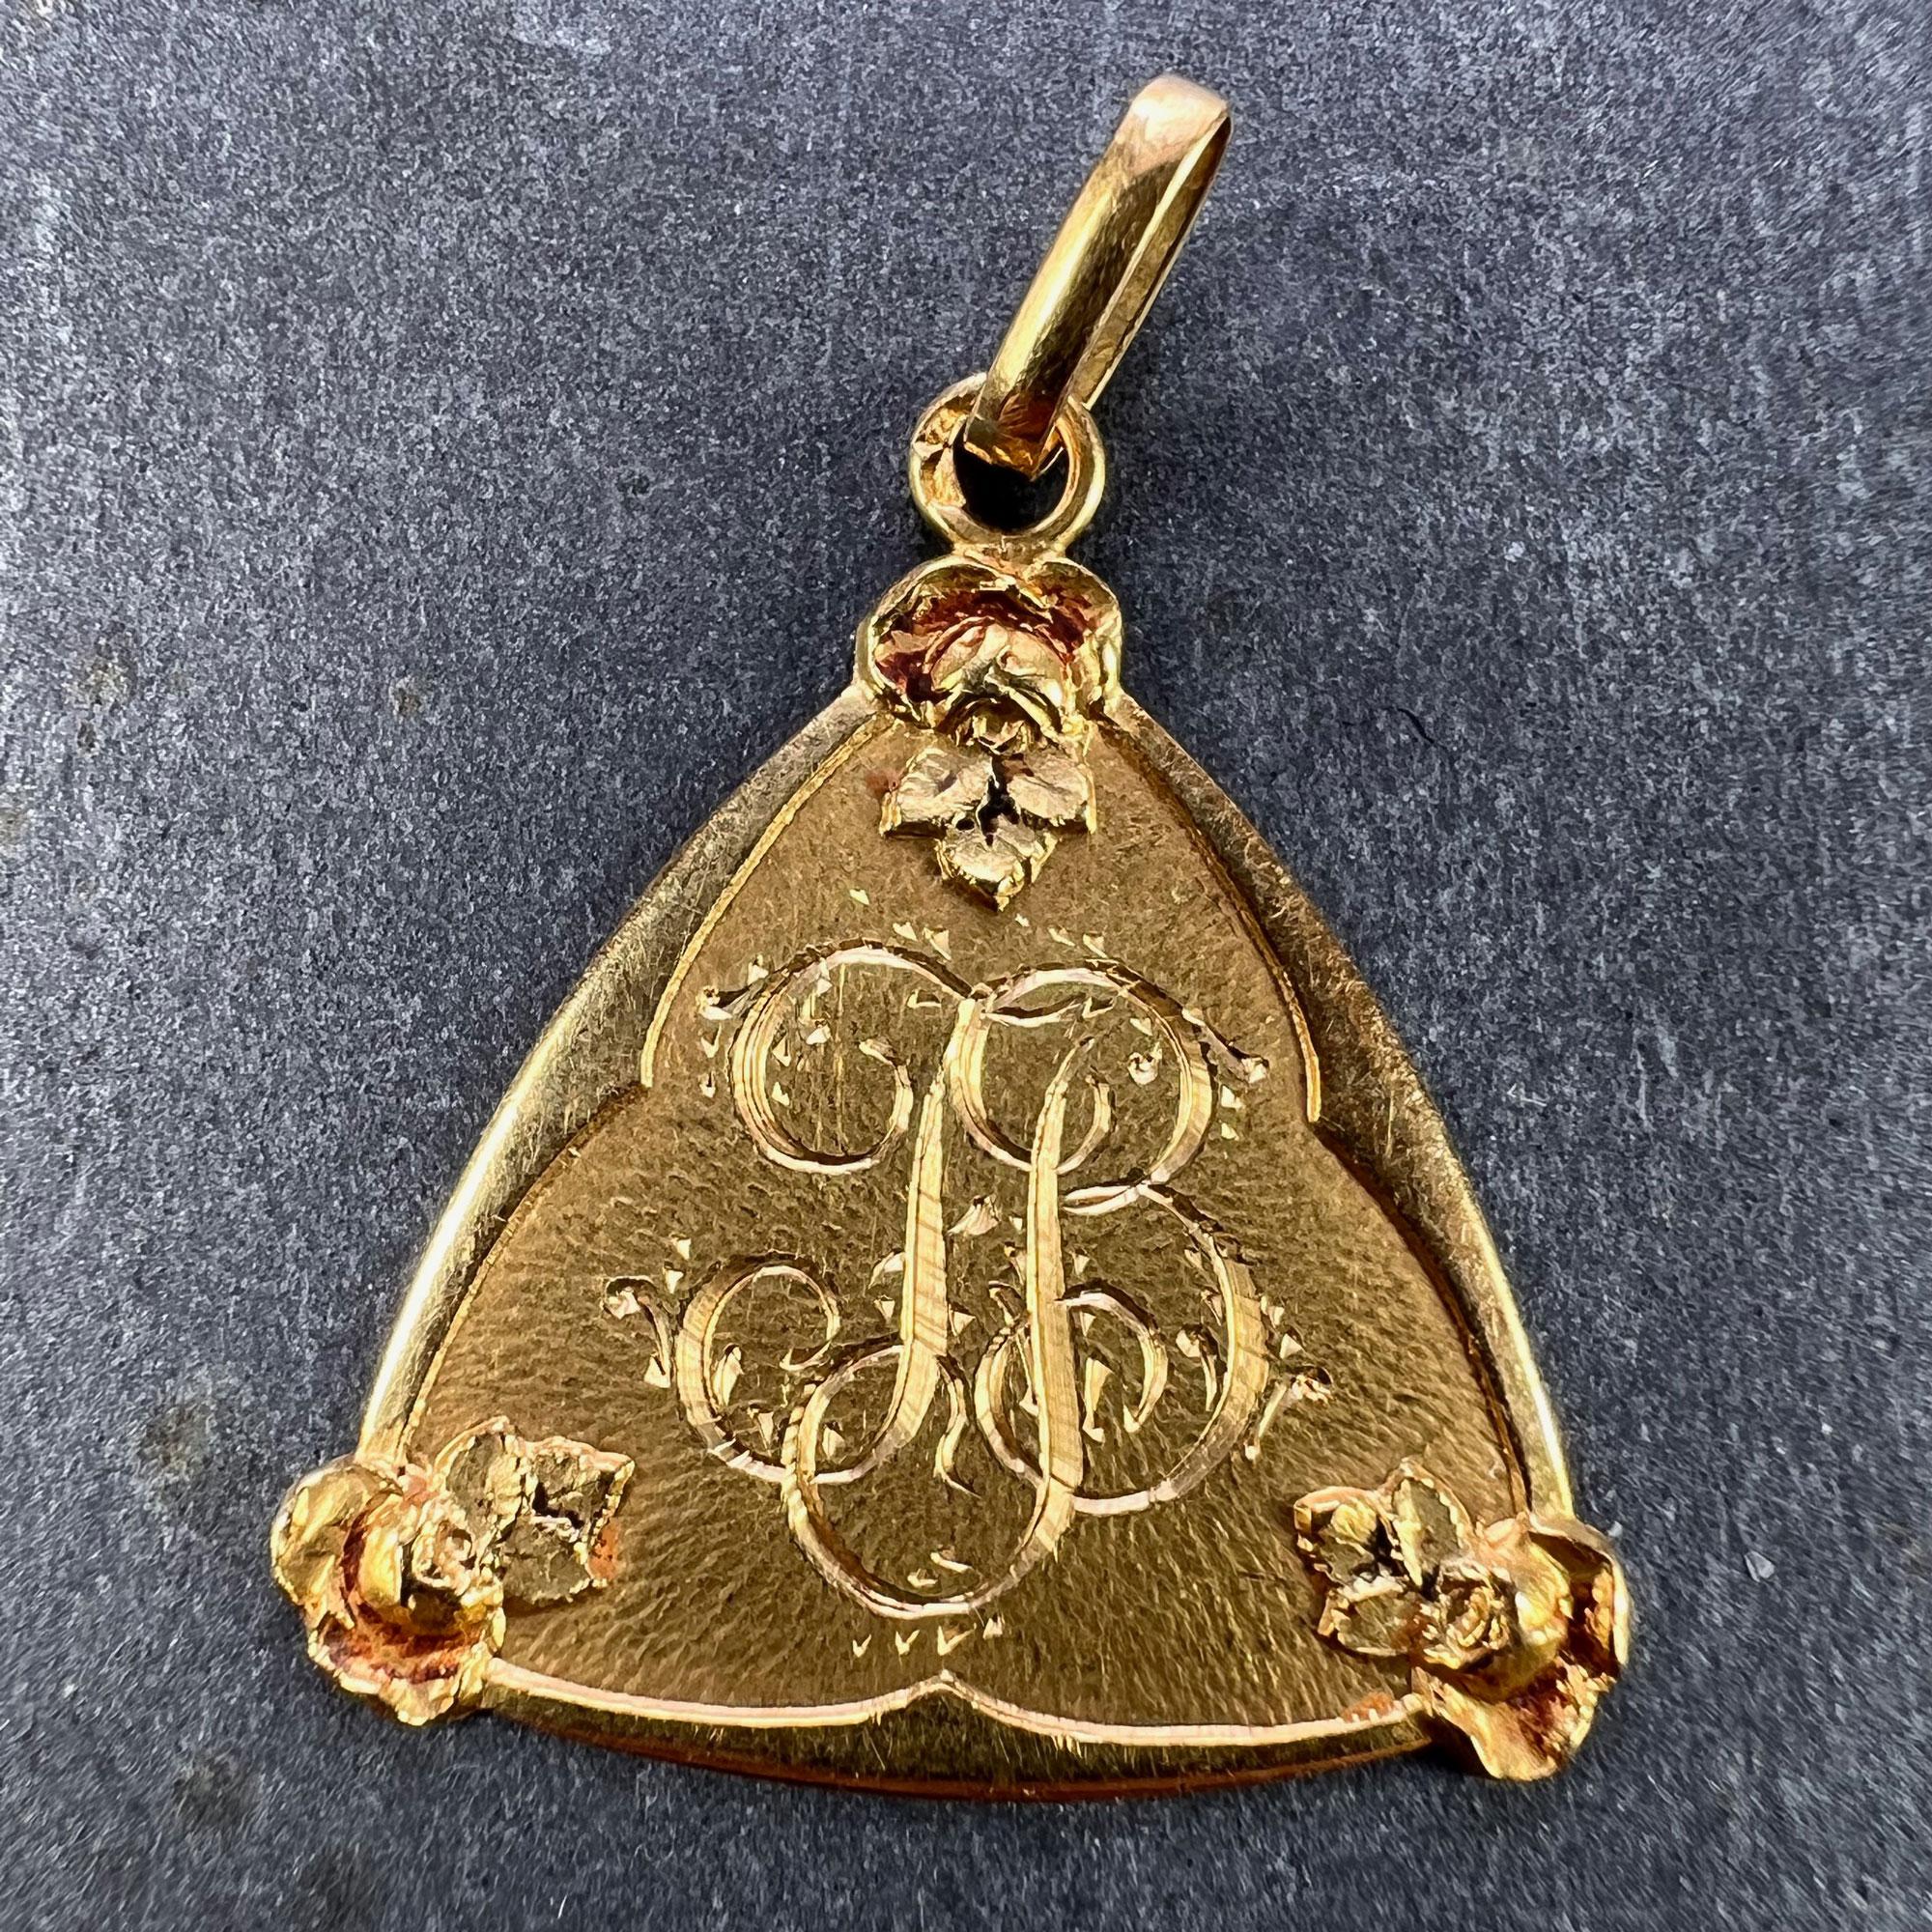 A French 18 karat (18K) yellow gold charm pendant designed as an triangular medal detailing a monogram with the initials JB in engraved script within a triangle framed by roses and rose leaves. Engraved to the reverse with the date '3 Novembre